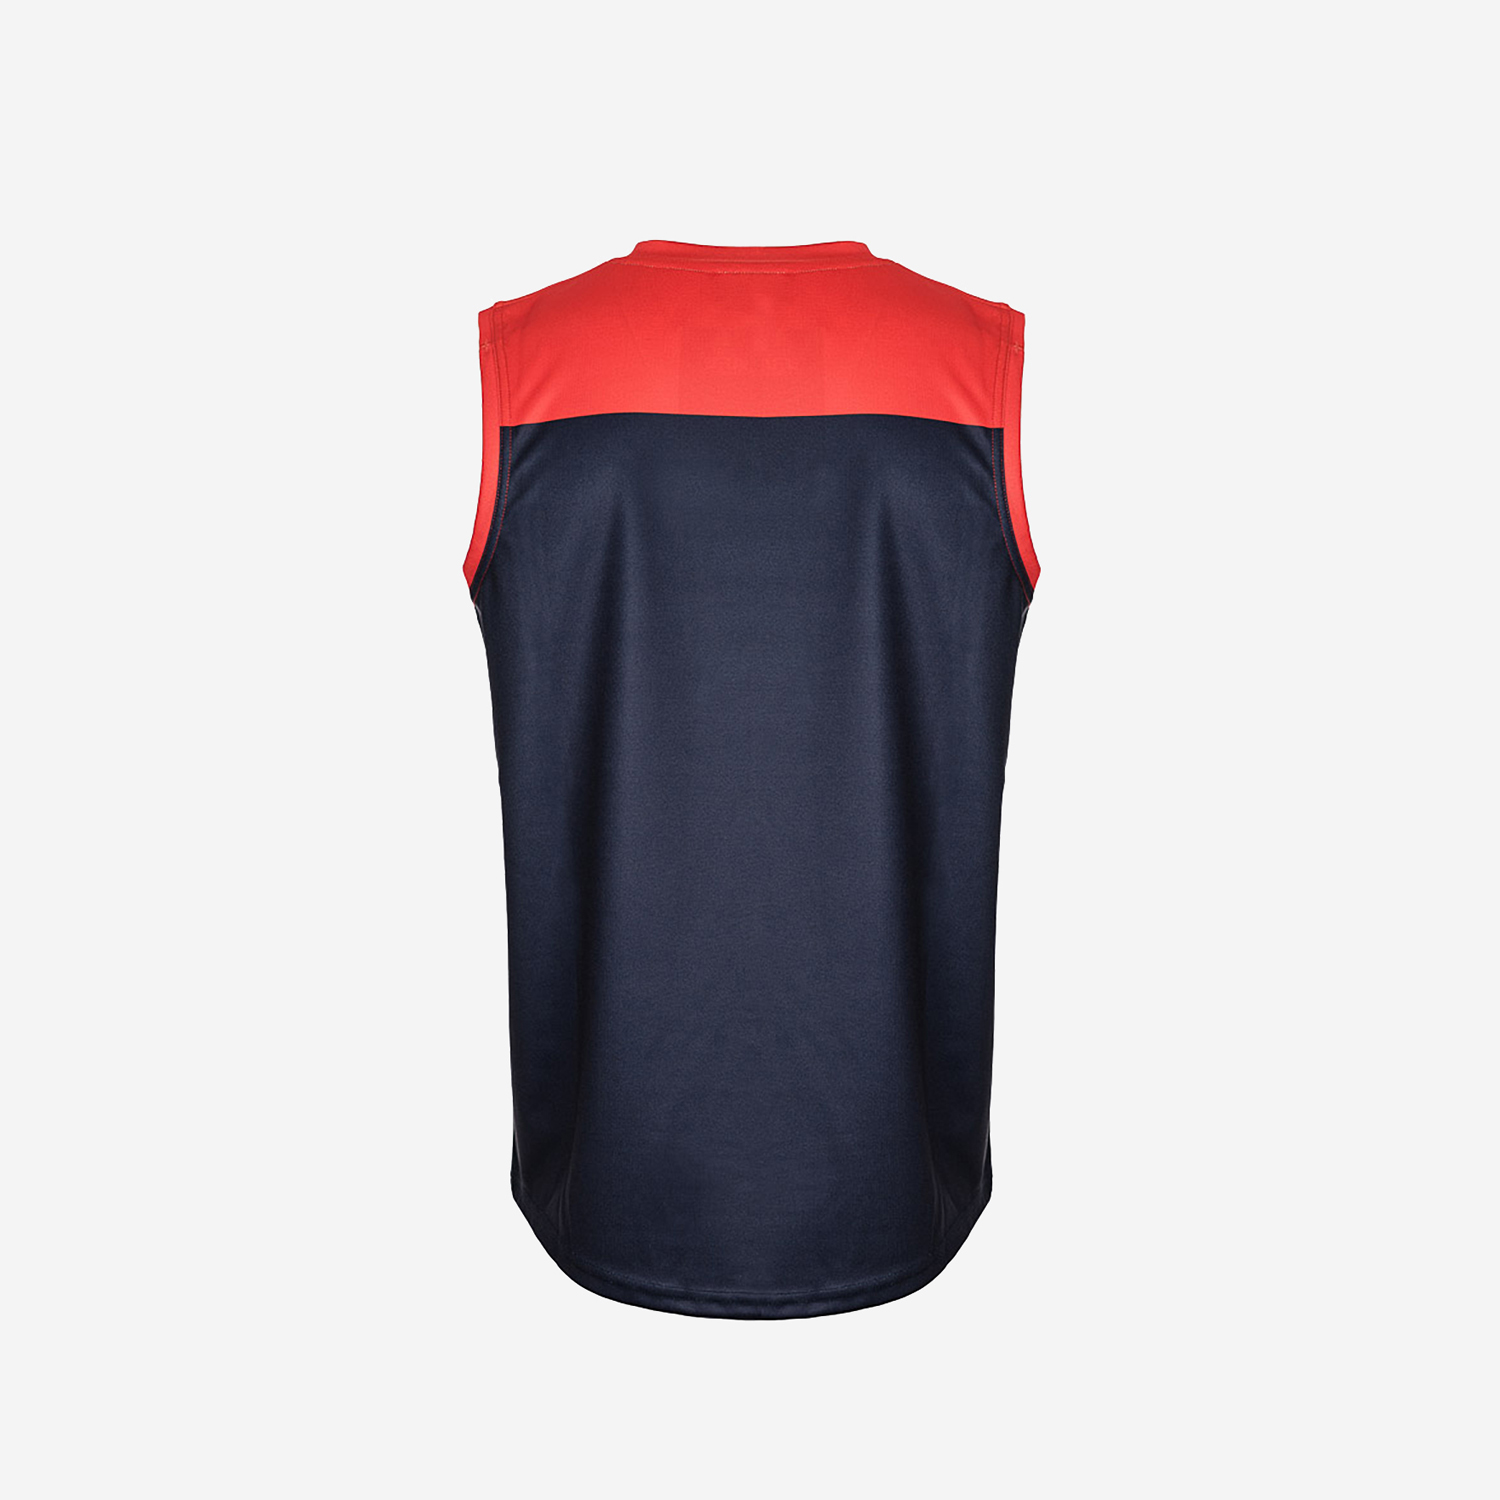 MELBOURNE DEMONS AFL REPLICA YOUTH GUERNSEY